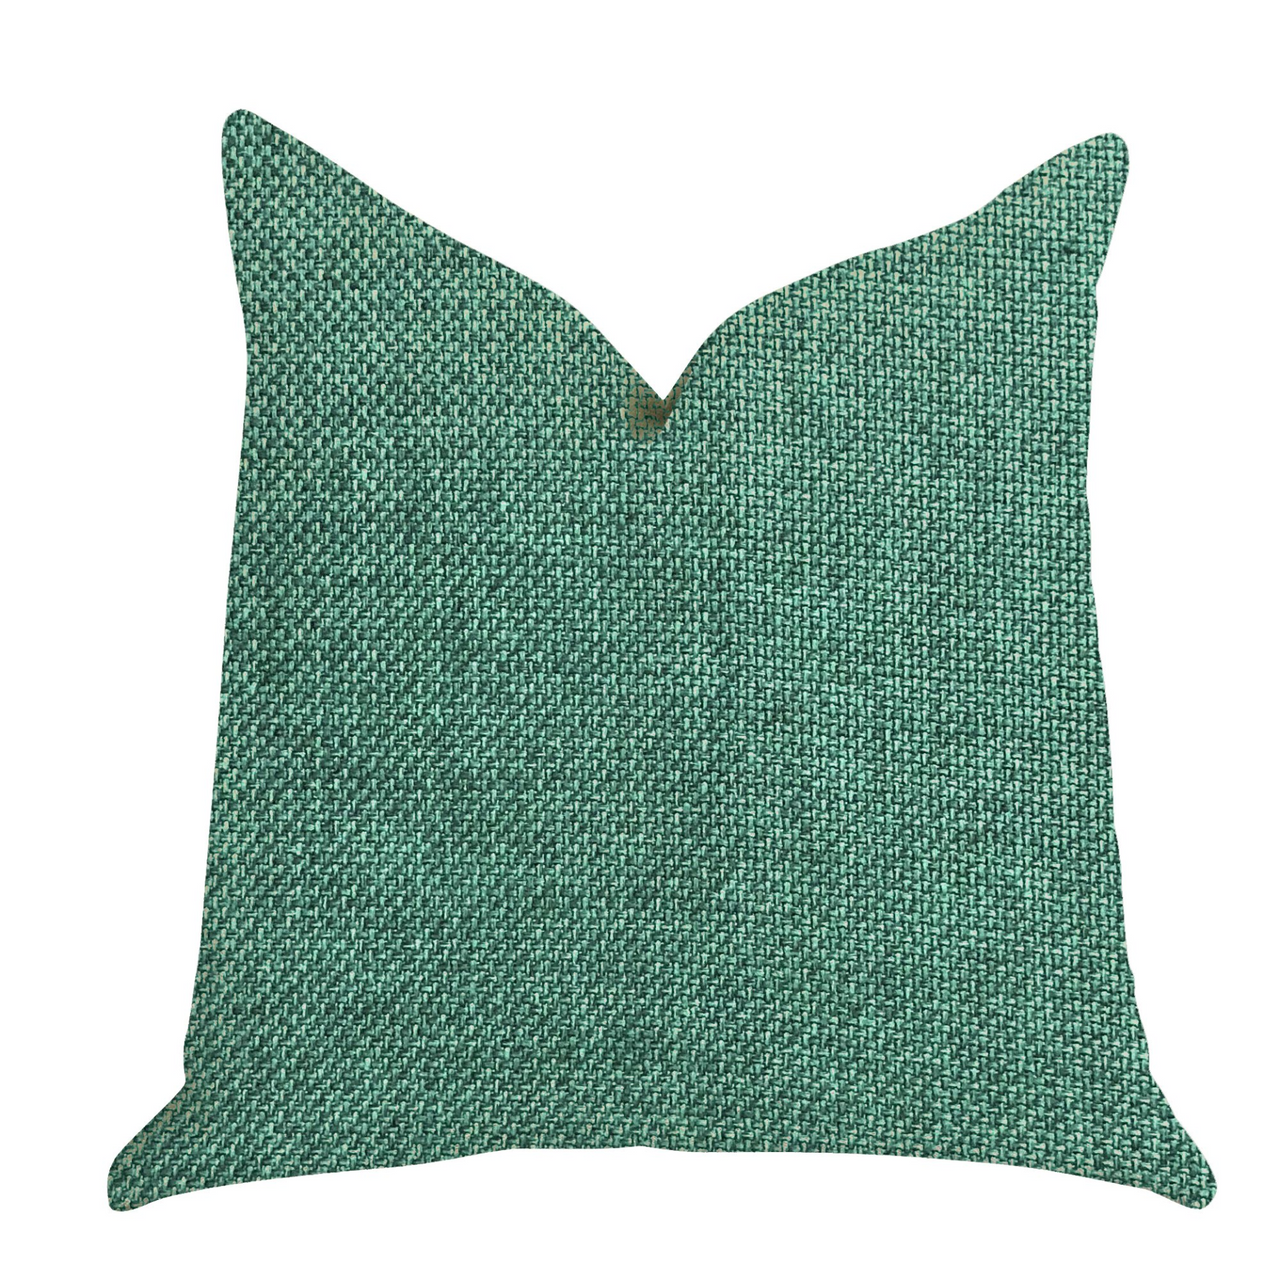 Grass Seed Luxury Throw Pillow in Green